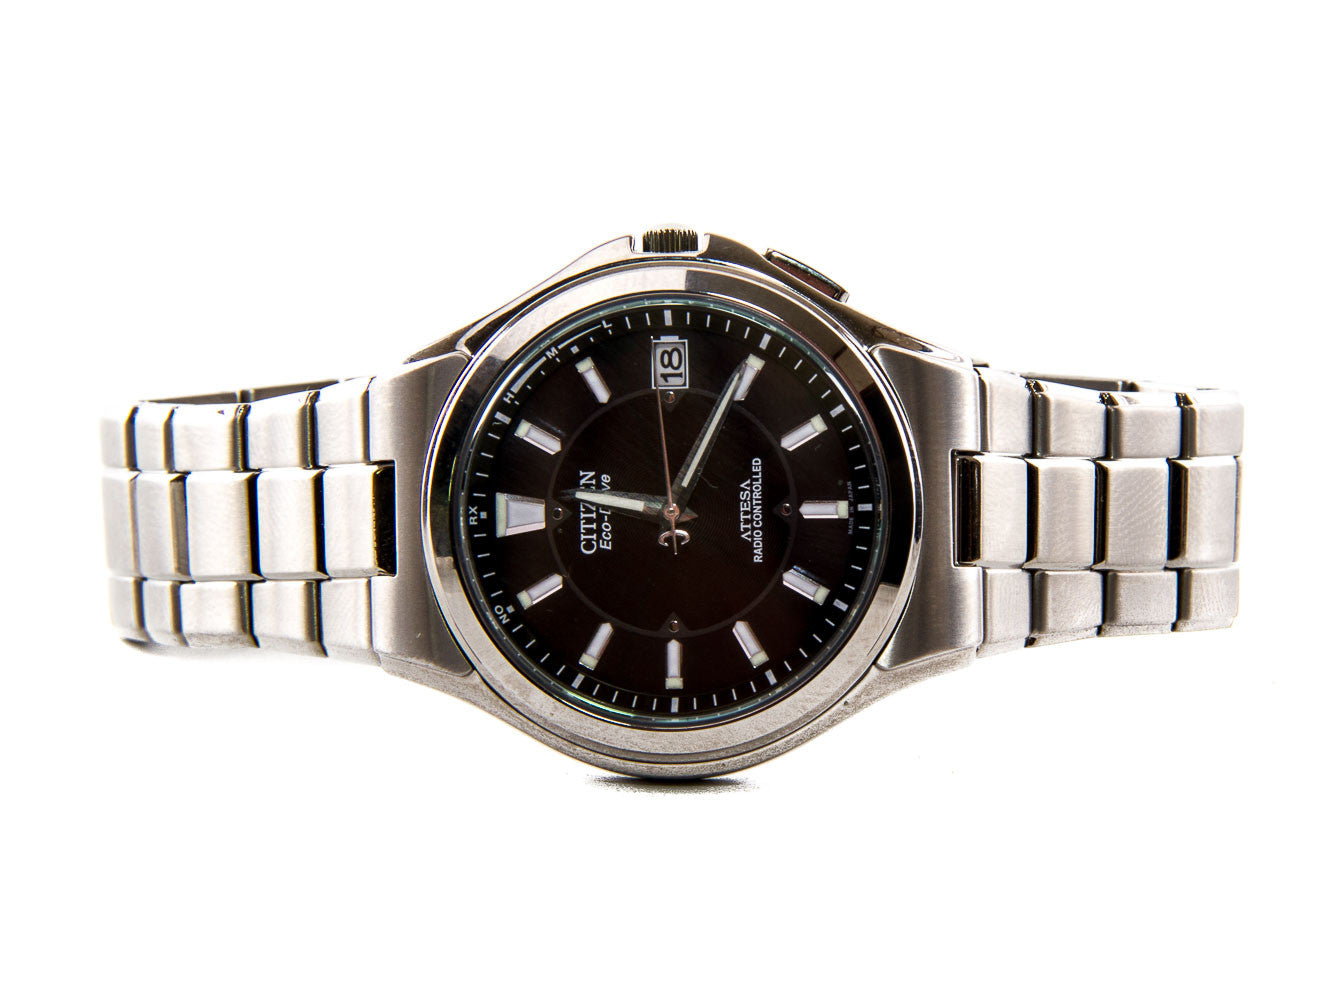 Citizen Rare Luxury CC4056-62W Limited Attesa Burgundy Radio... for $2,631  for sale from a Trusted Seller on Chrono24